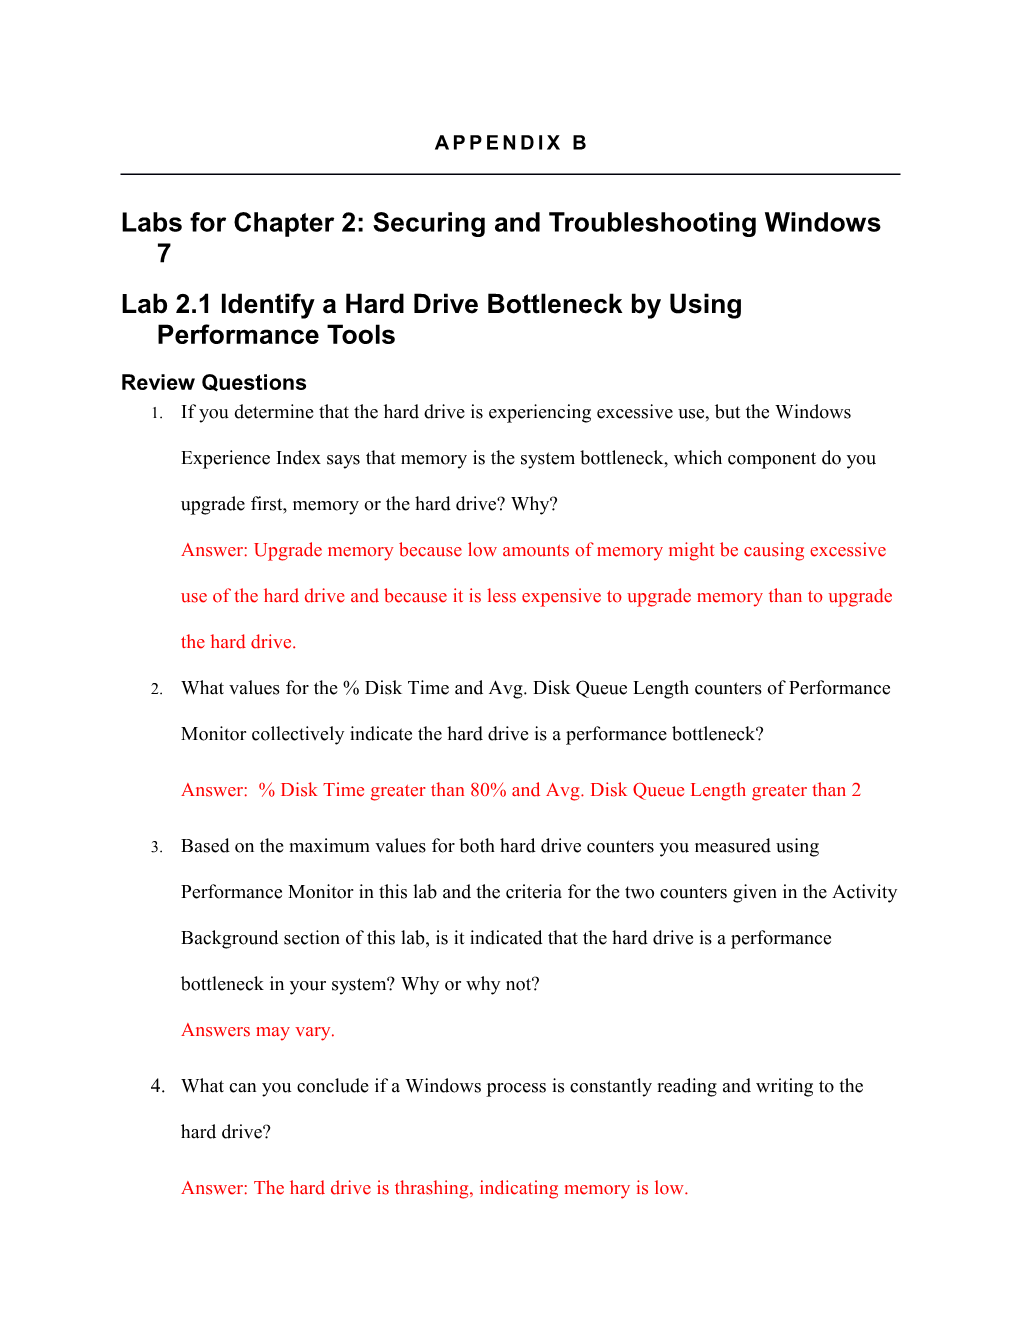 Labs for Chapter 2: Securing and Troubleshooting Windows 7